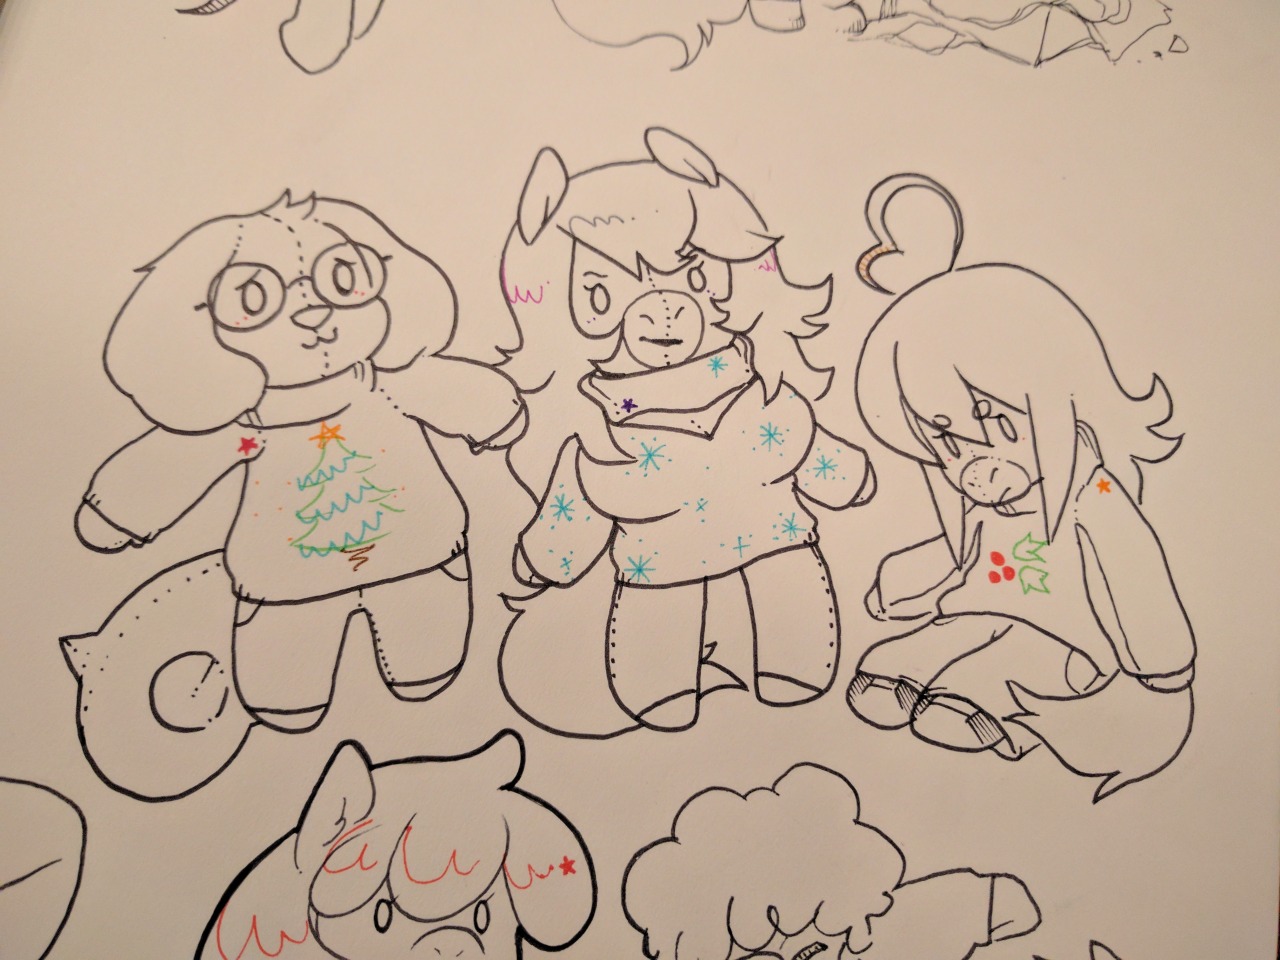 galacticponycafe: Christmas doodles for the poner fam  My Velvet and Eclaire being